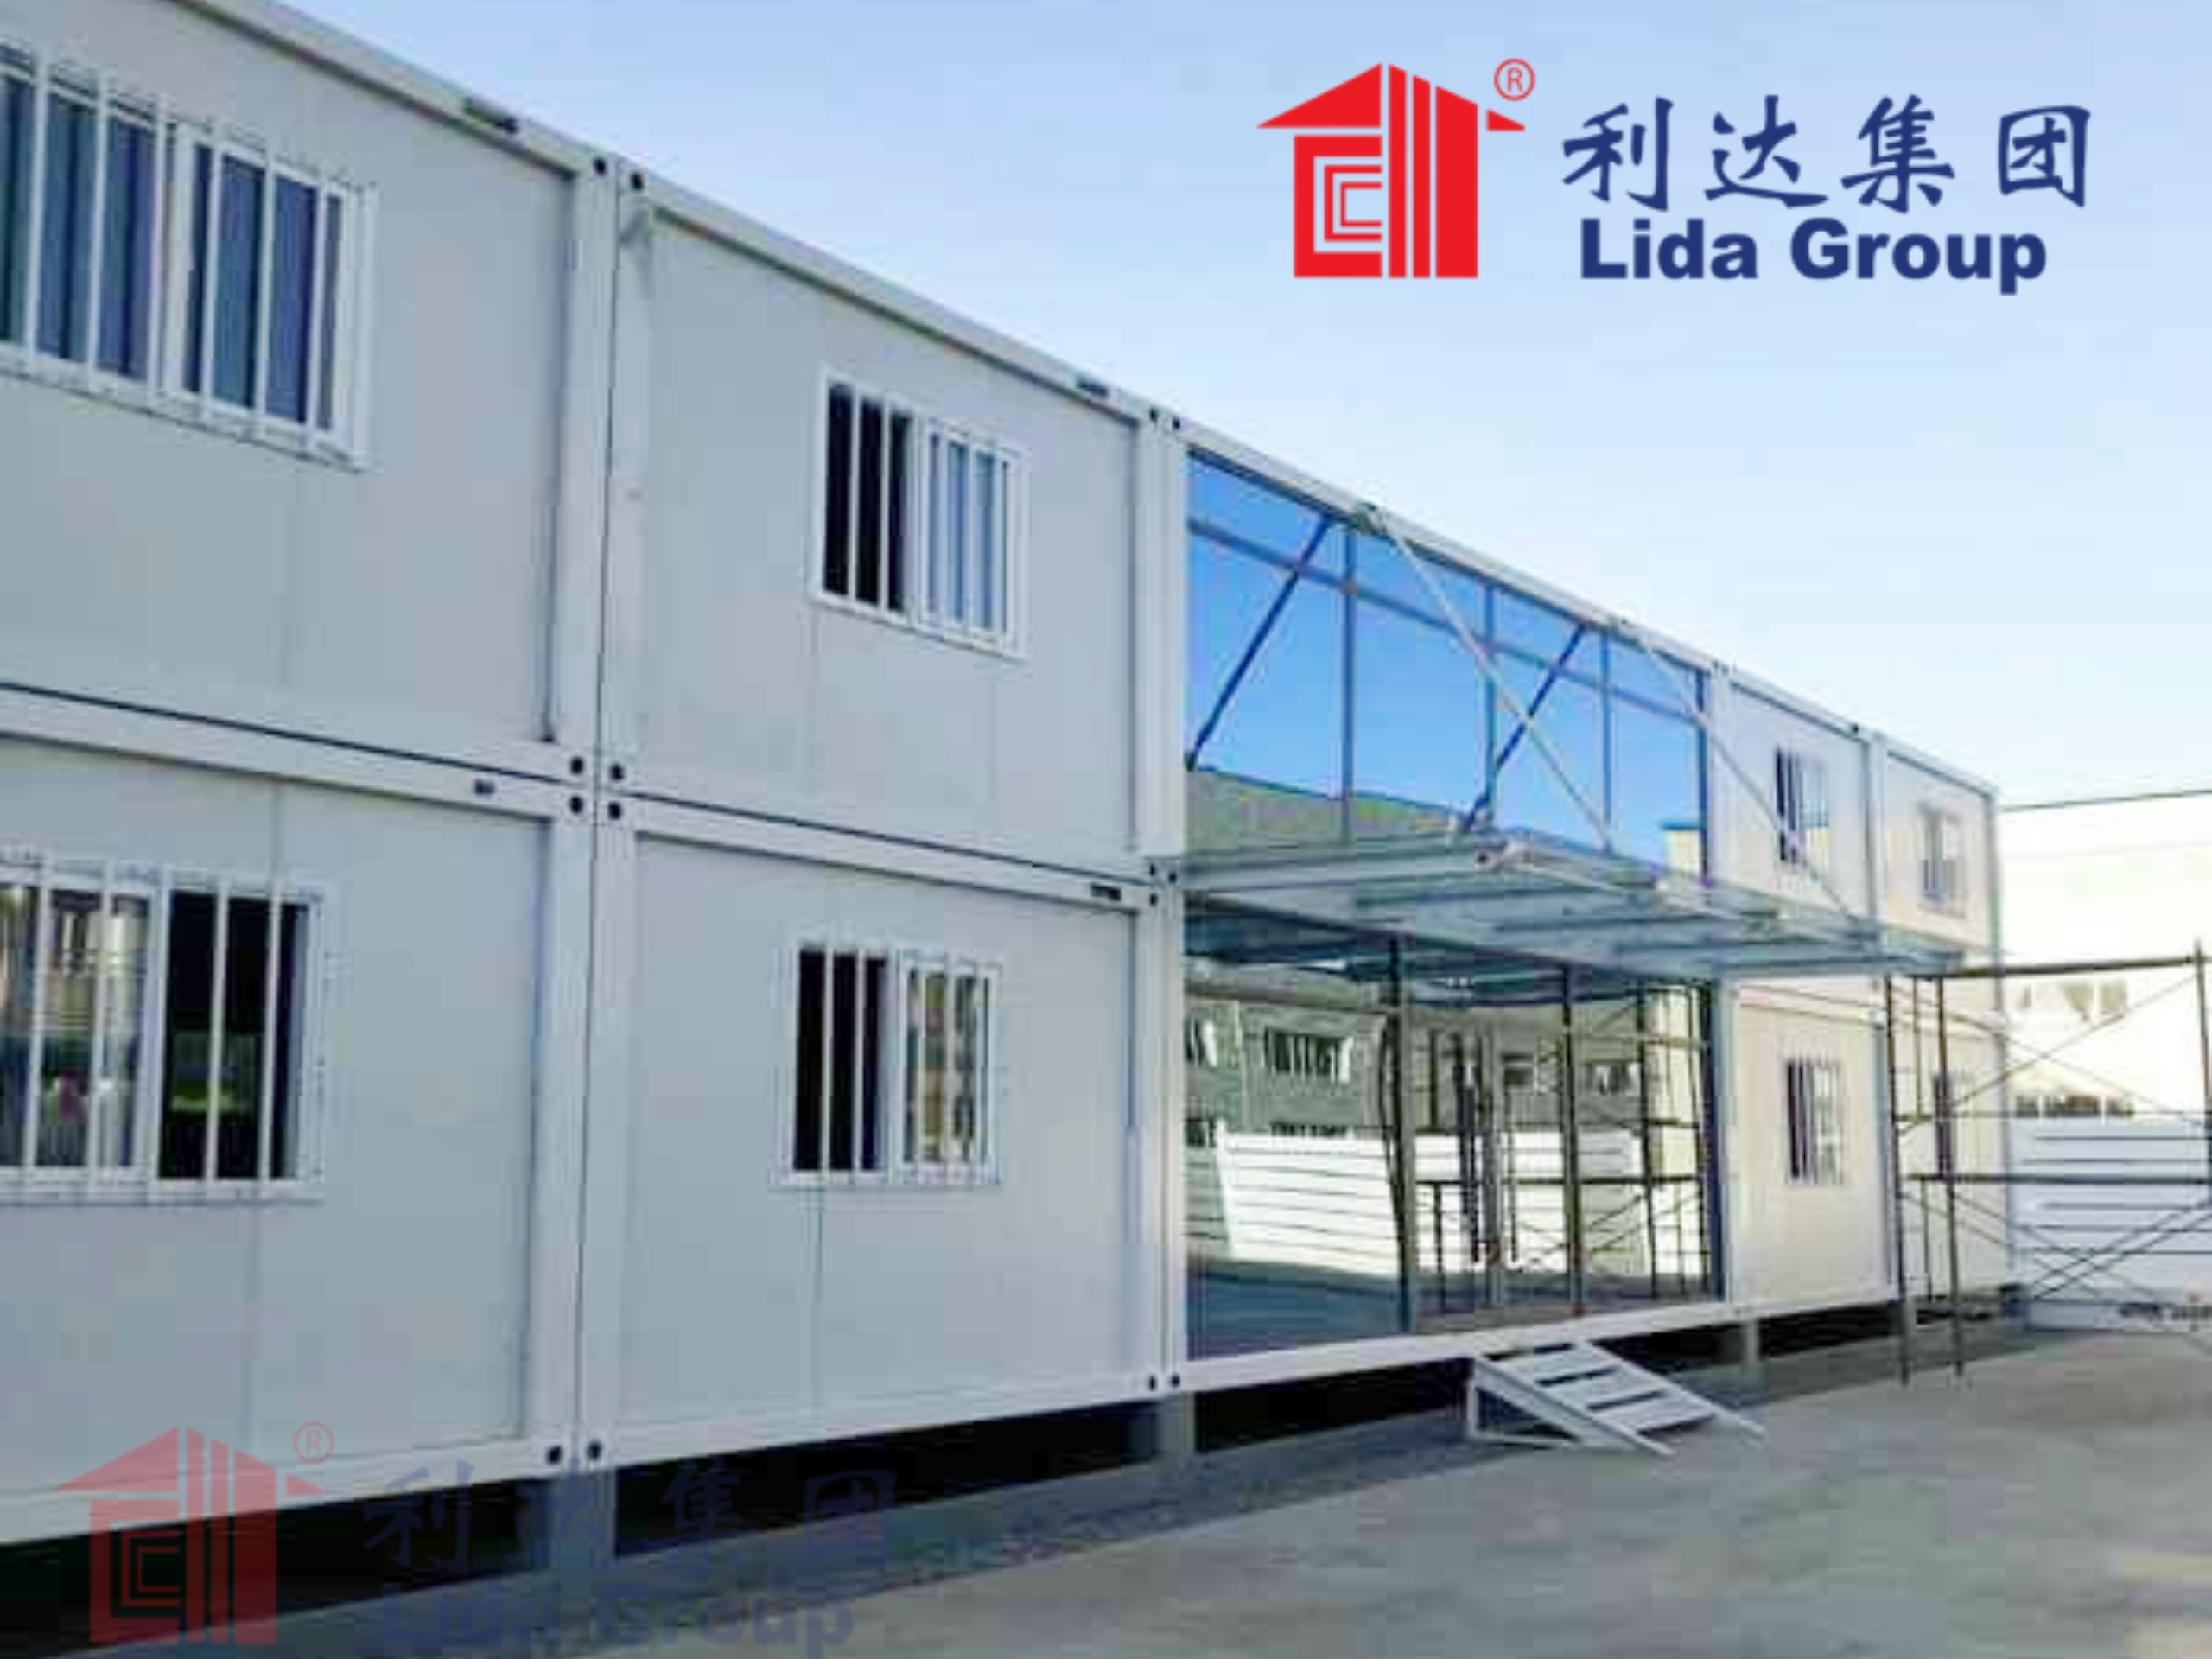 Adaptable container house designs highlight versatility of Lida Group's structural insulatedpanels and pre-engineered building components providing customizable layouts and efficient construction.